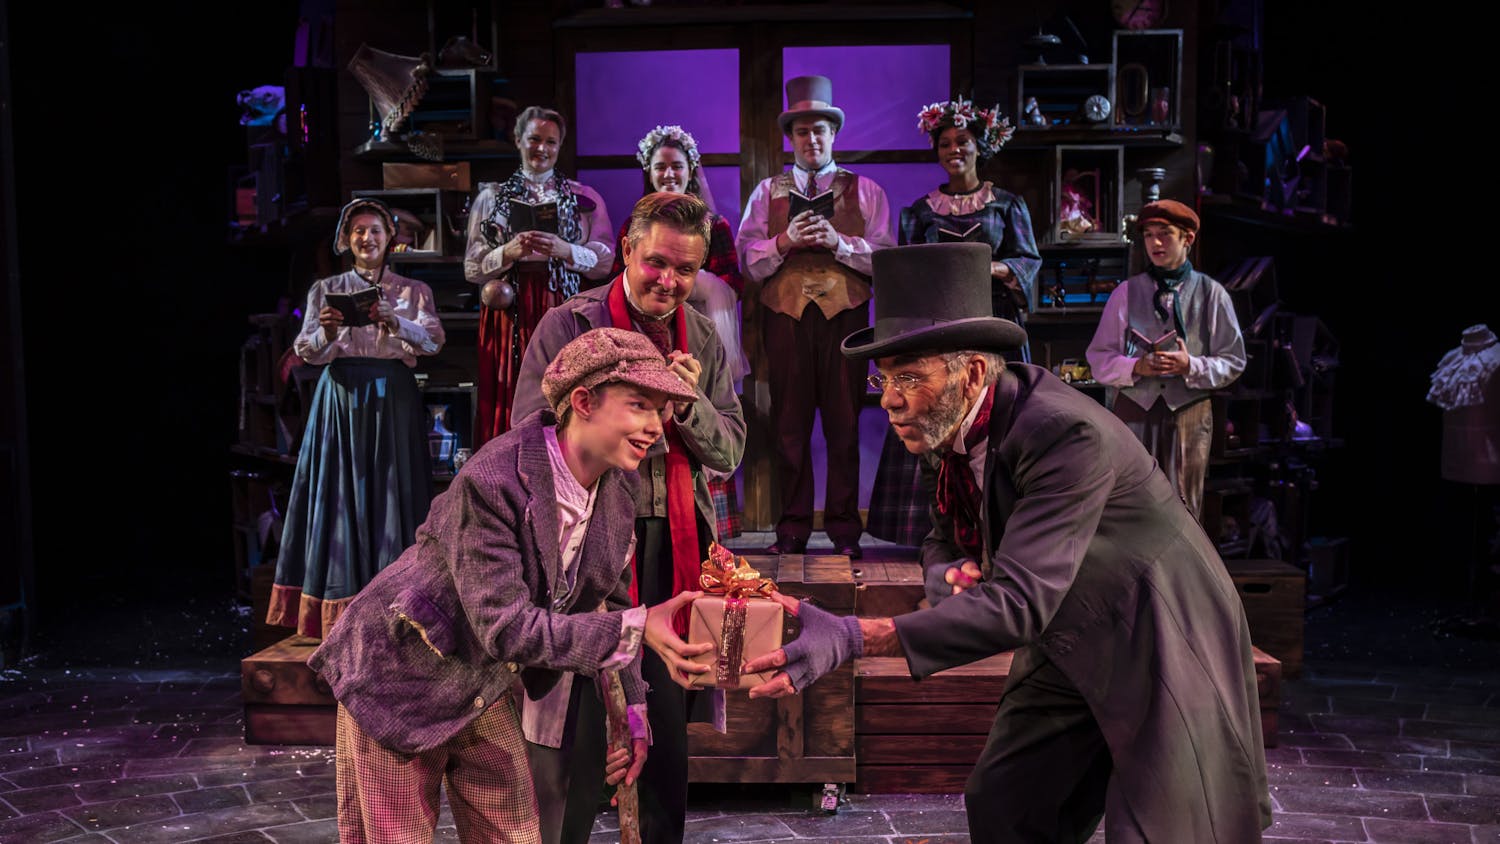 Actors from The Hippodrome are seen on stage for A Christmas Carol. ﻿